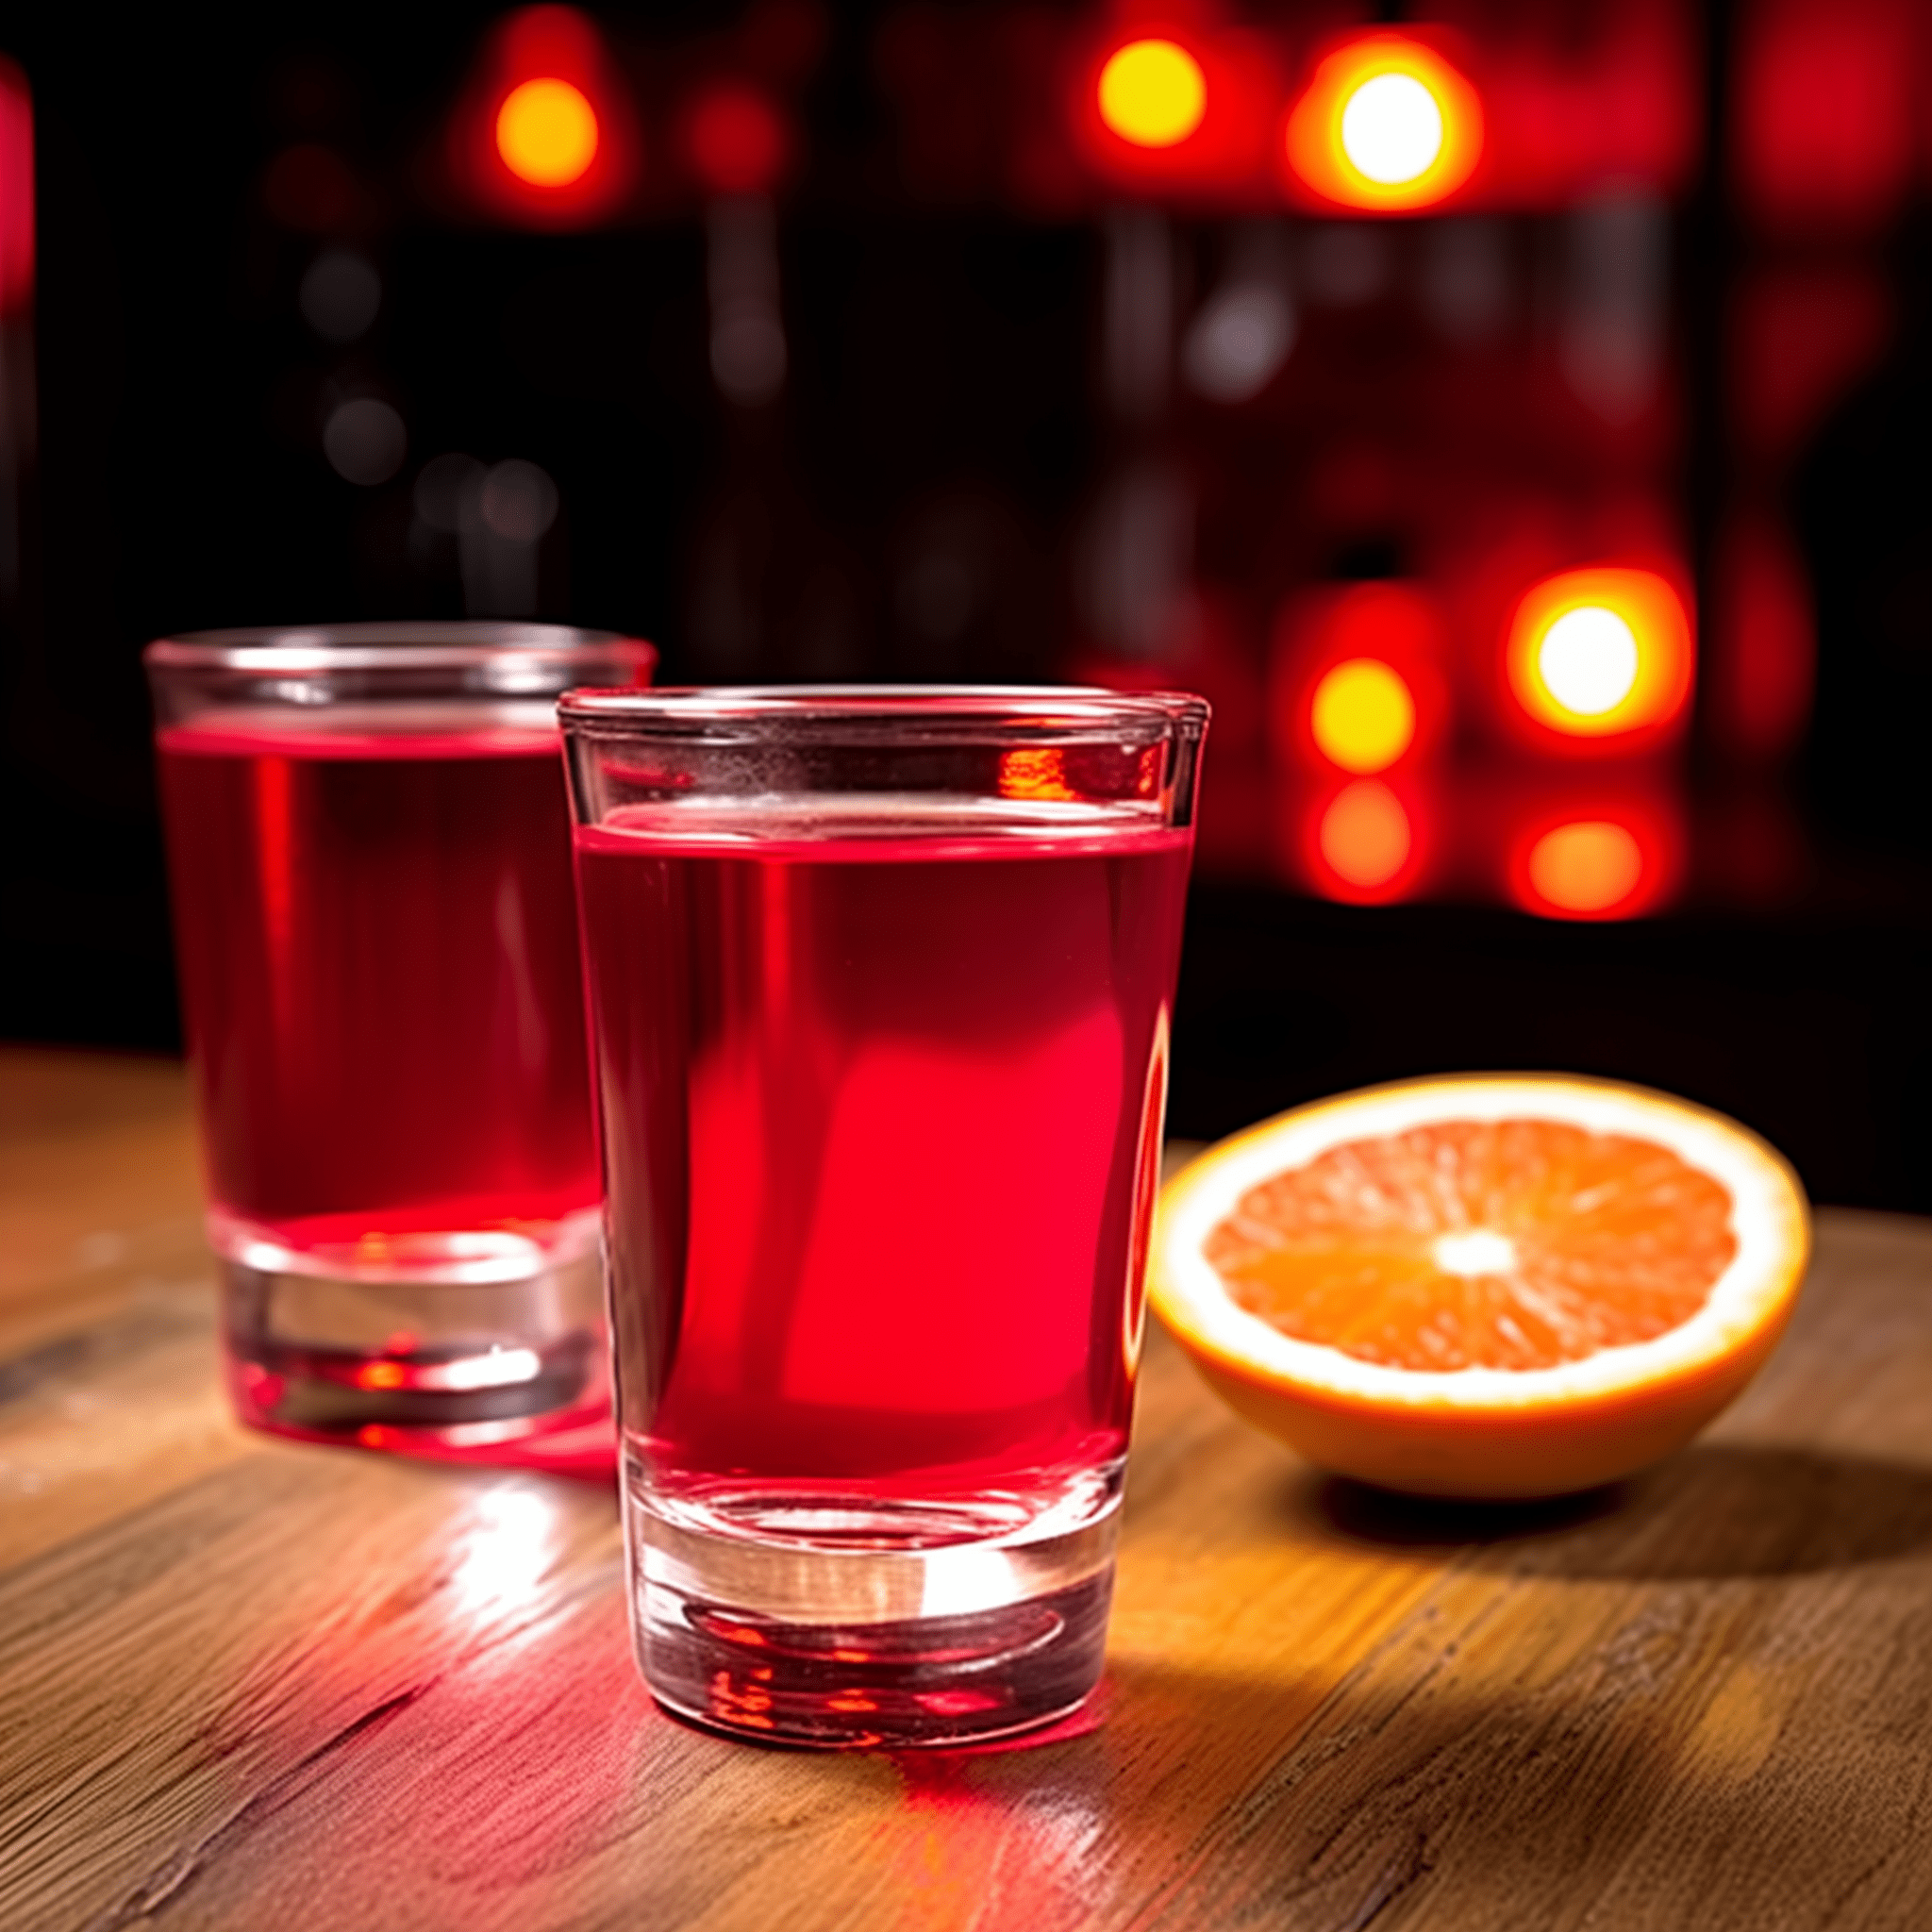 Husker Blackout Recipe - The Husker Blackout is a bold shot with a robust flavor profile. The vodka provides a sharp, clear bite, while the tequila adds a warm, earthy undertone. The dash of grenadine offers a sweet finish that slightly mellows the overall potency, creating a balanced yet strong taste.